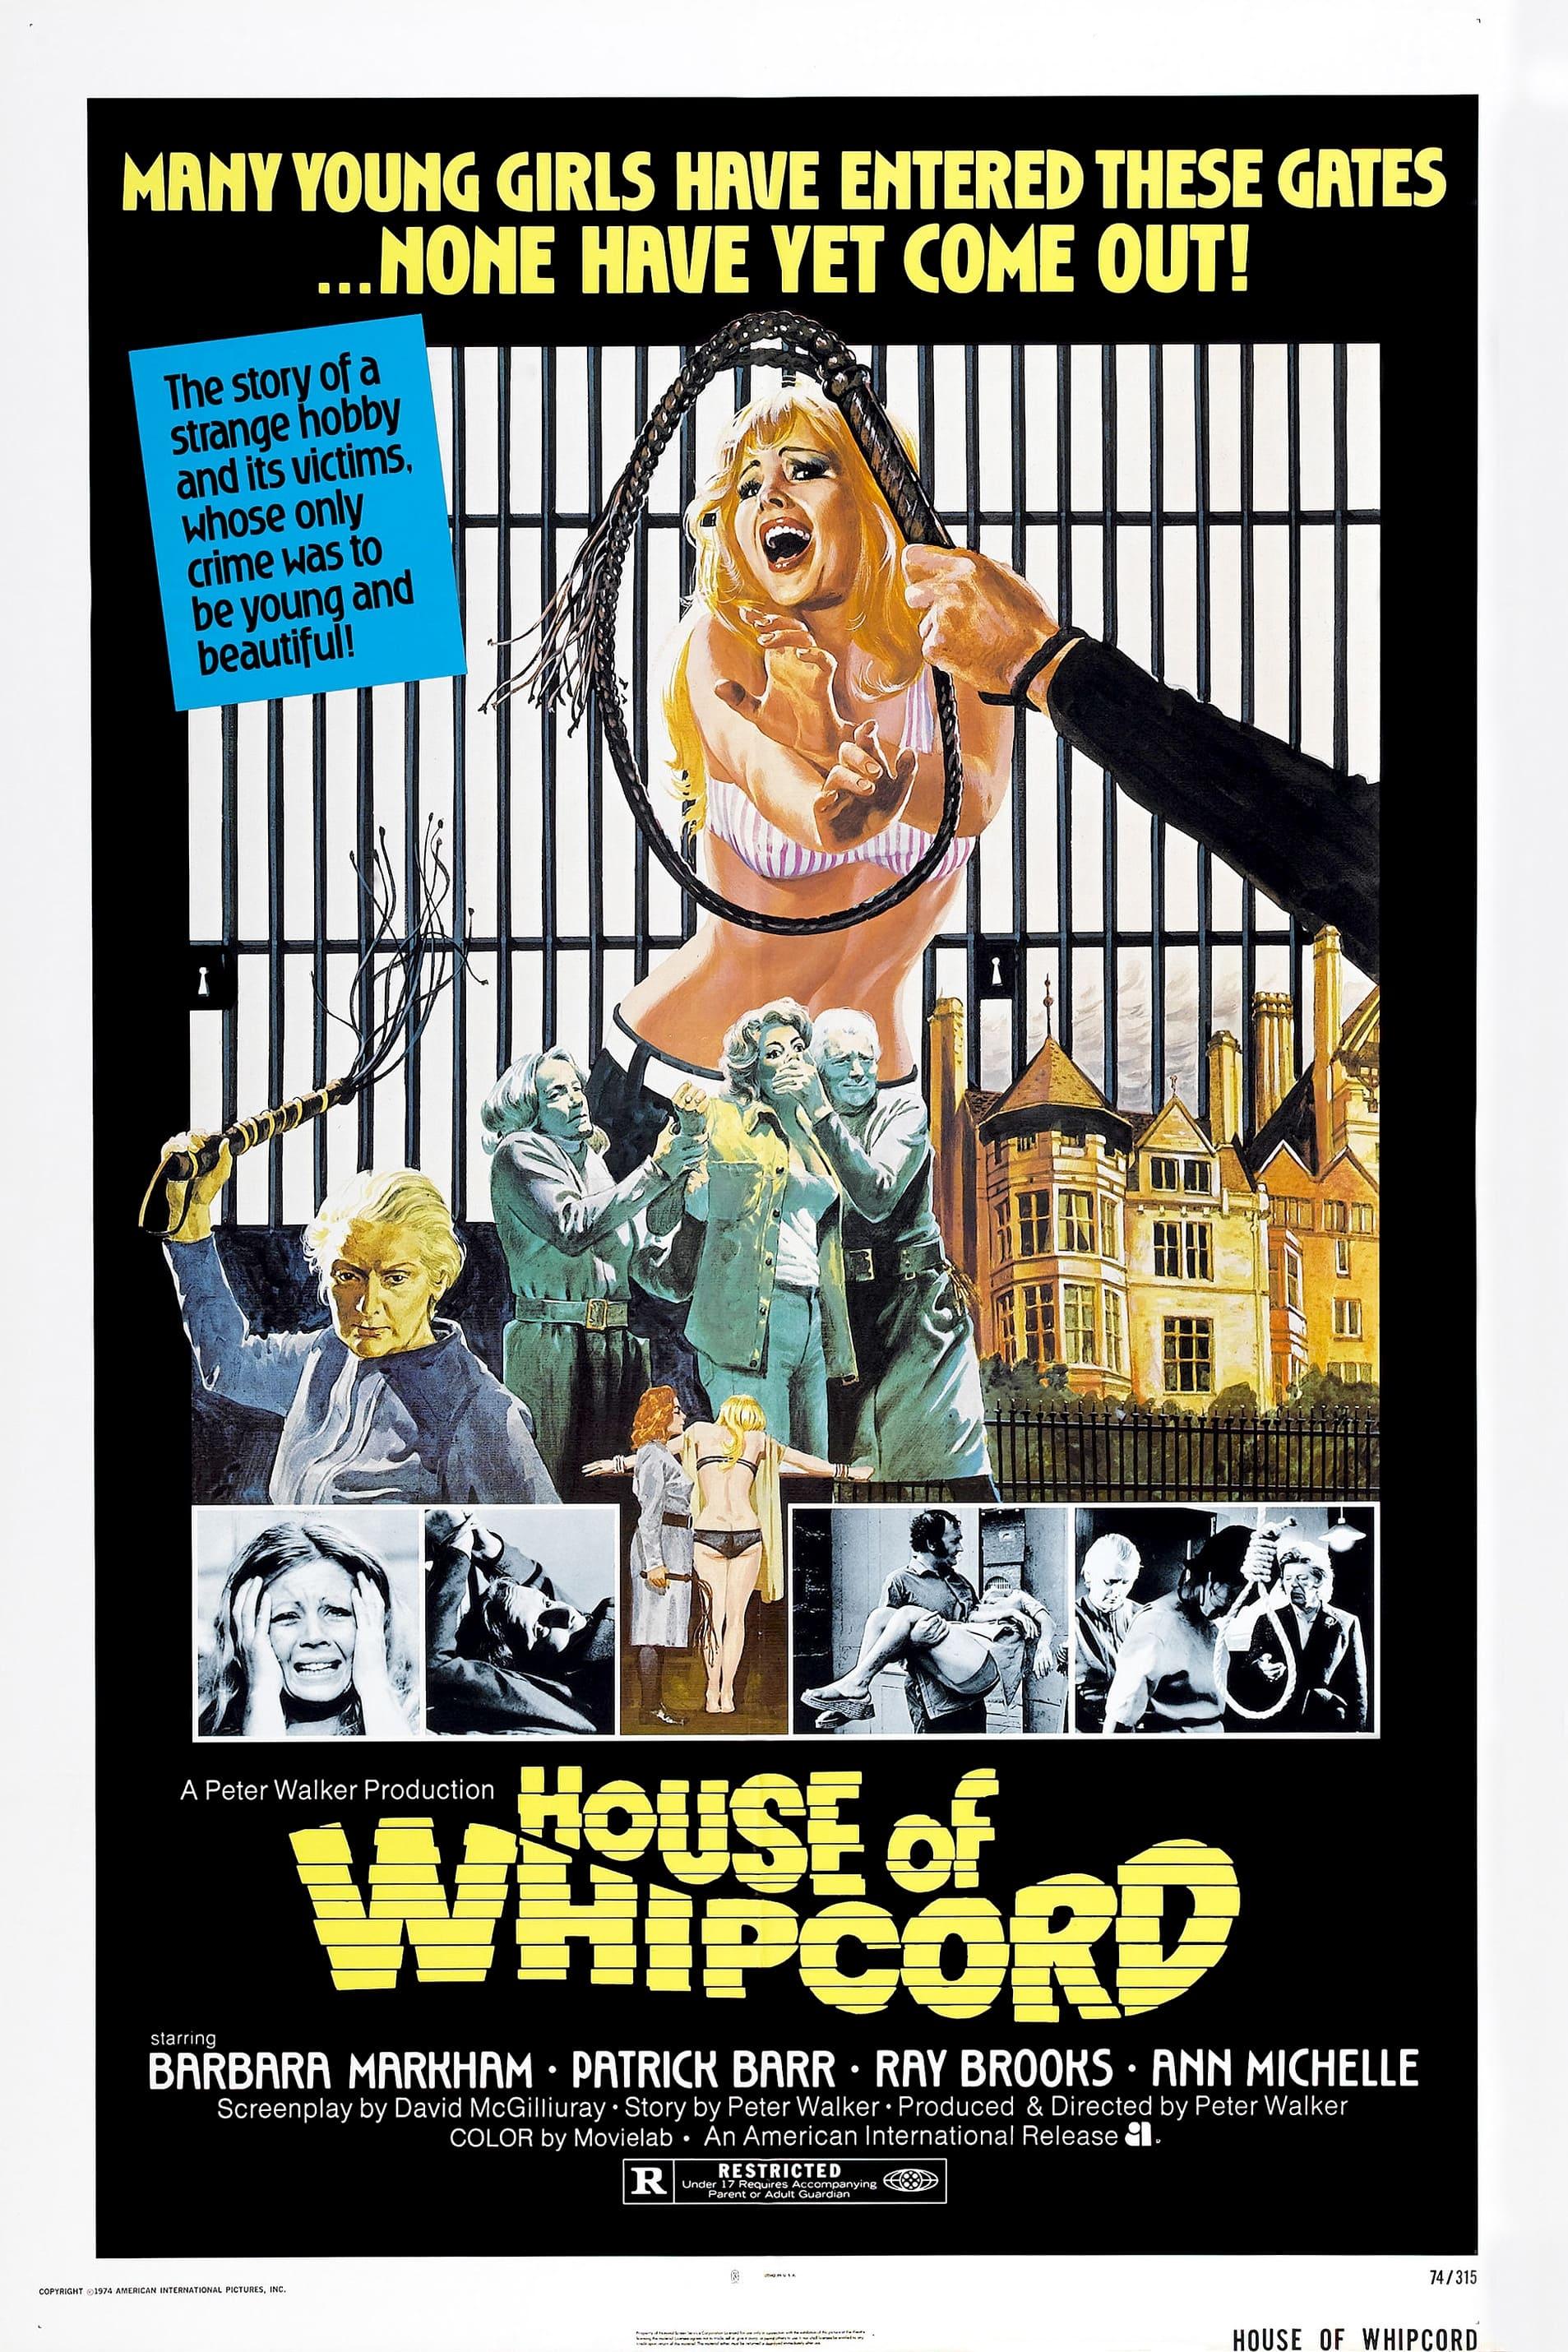 House of Whipcord poster